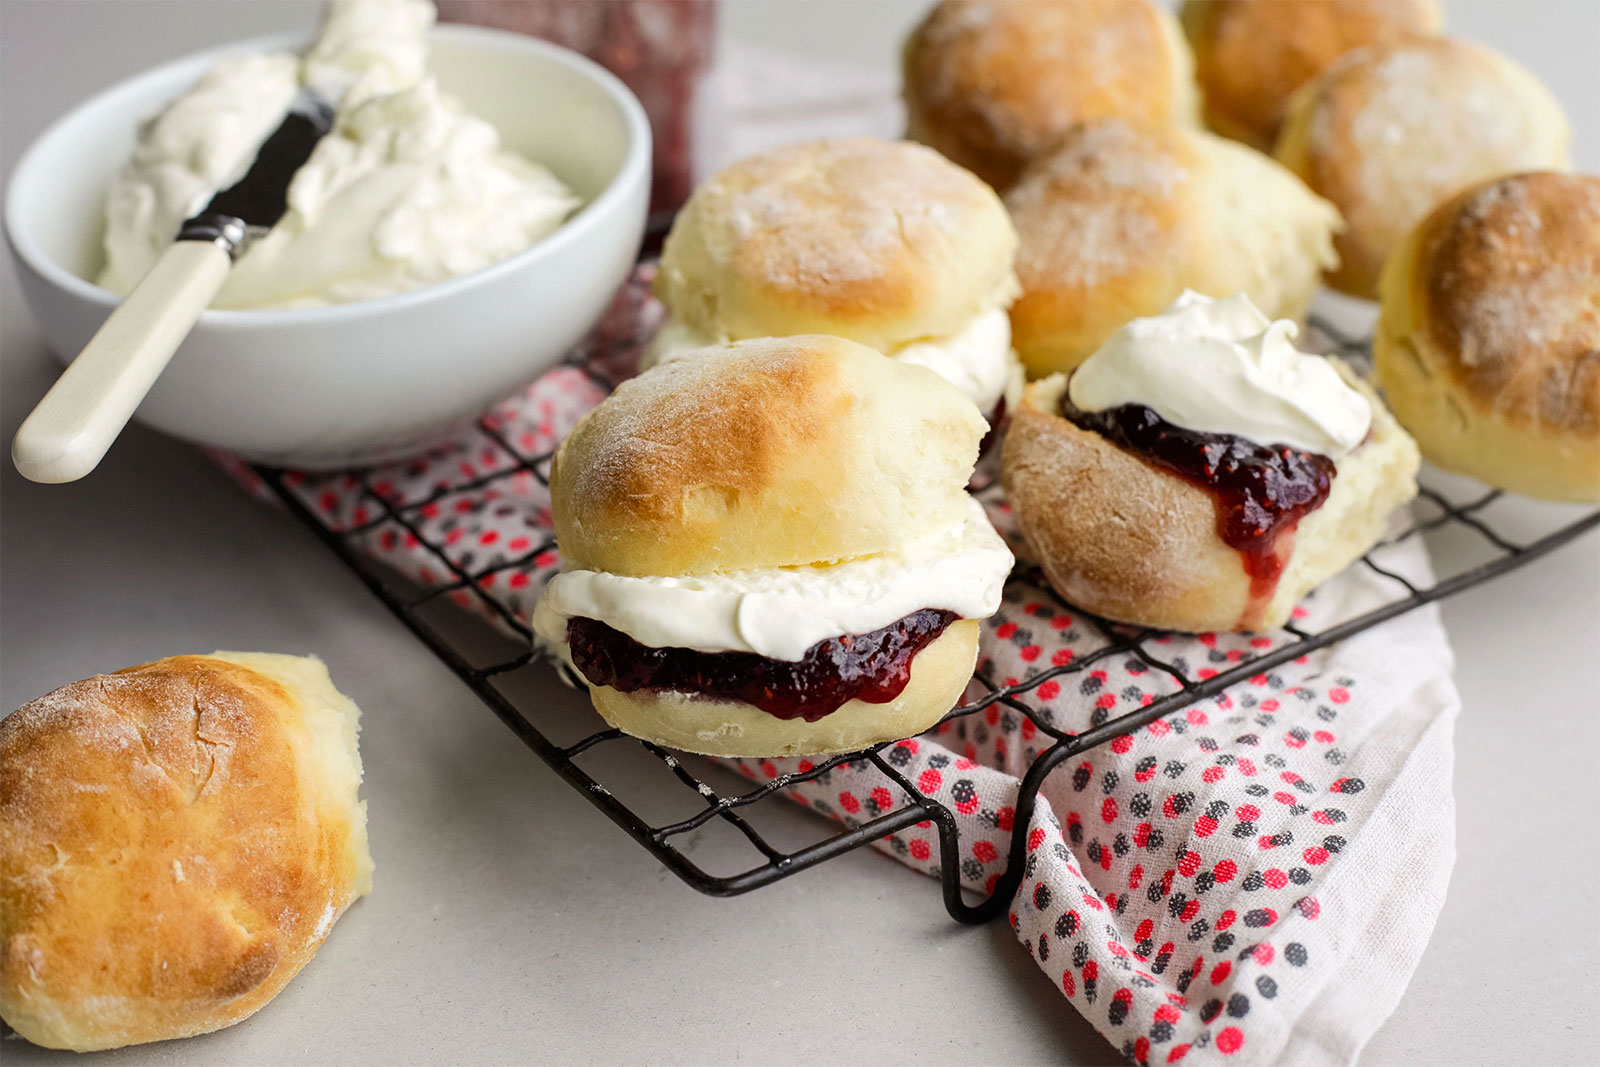 🥖 How Many Baked Goods Have You Tried from Around the World? Scones